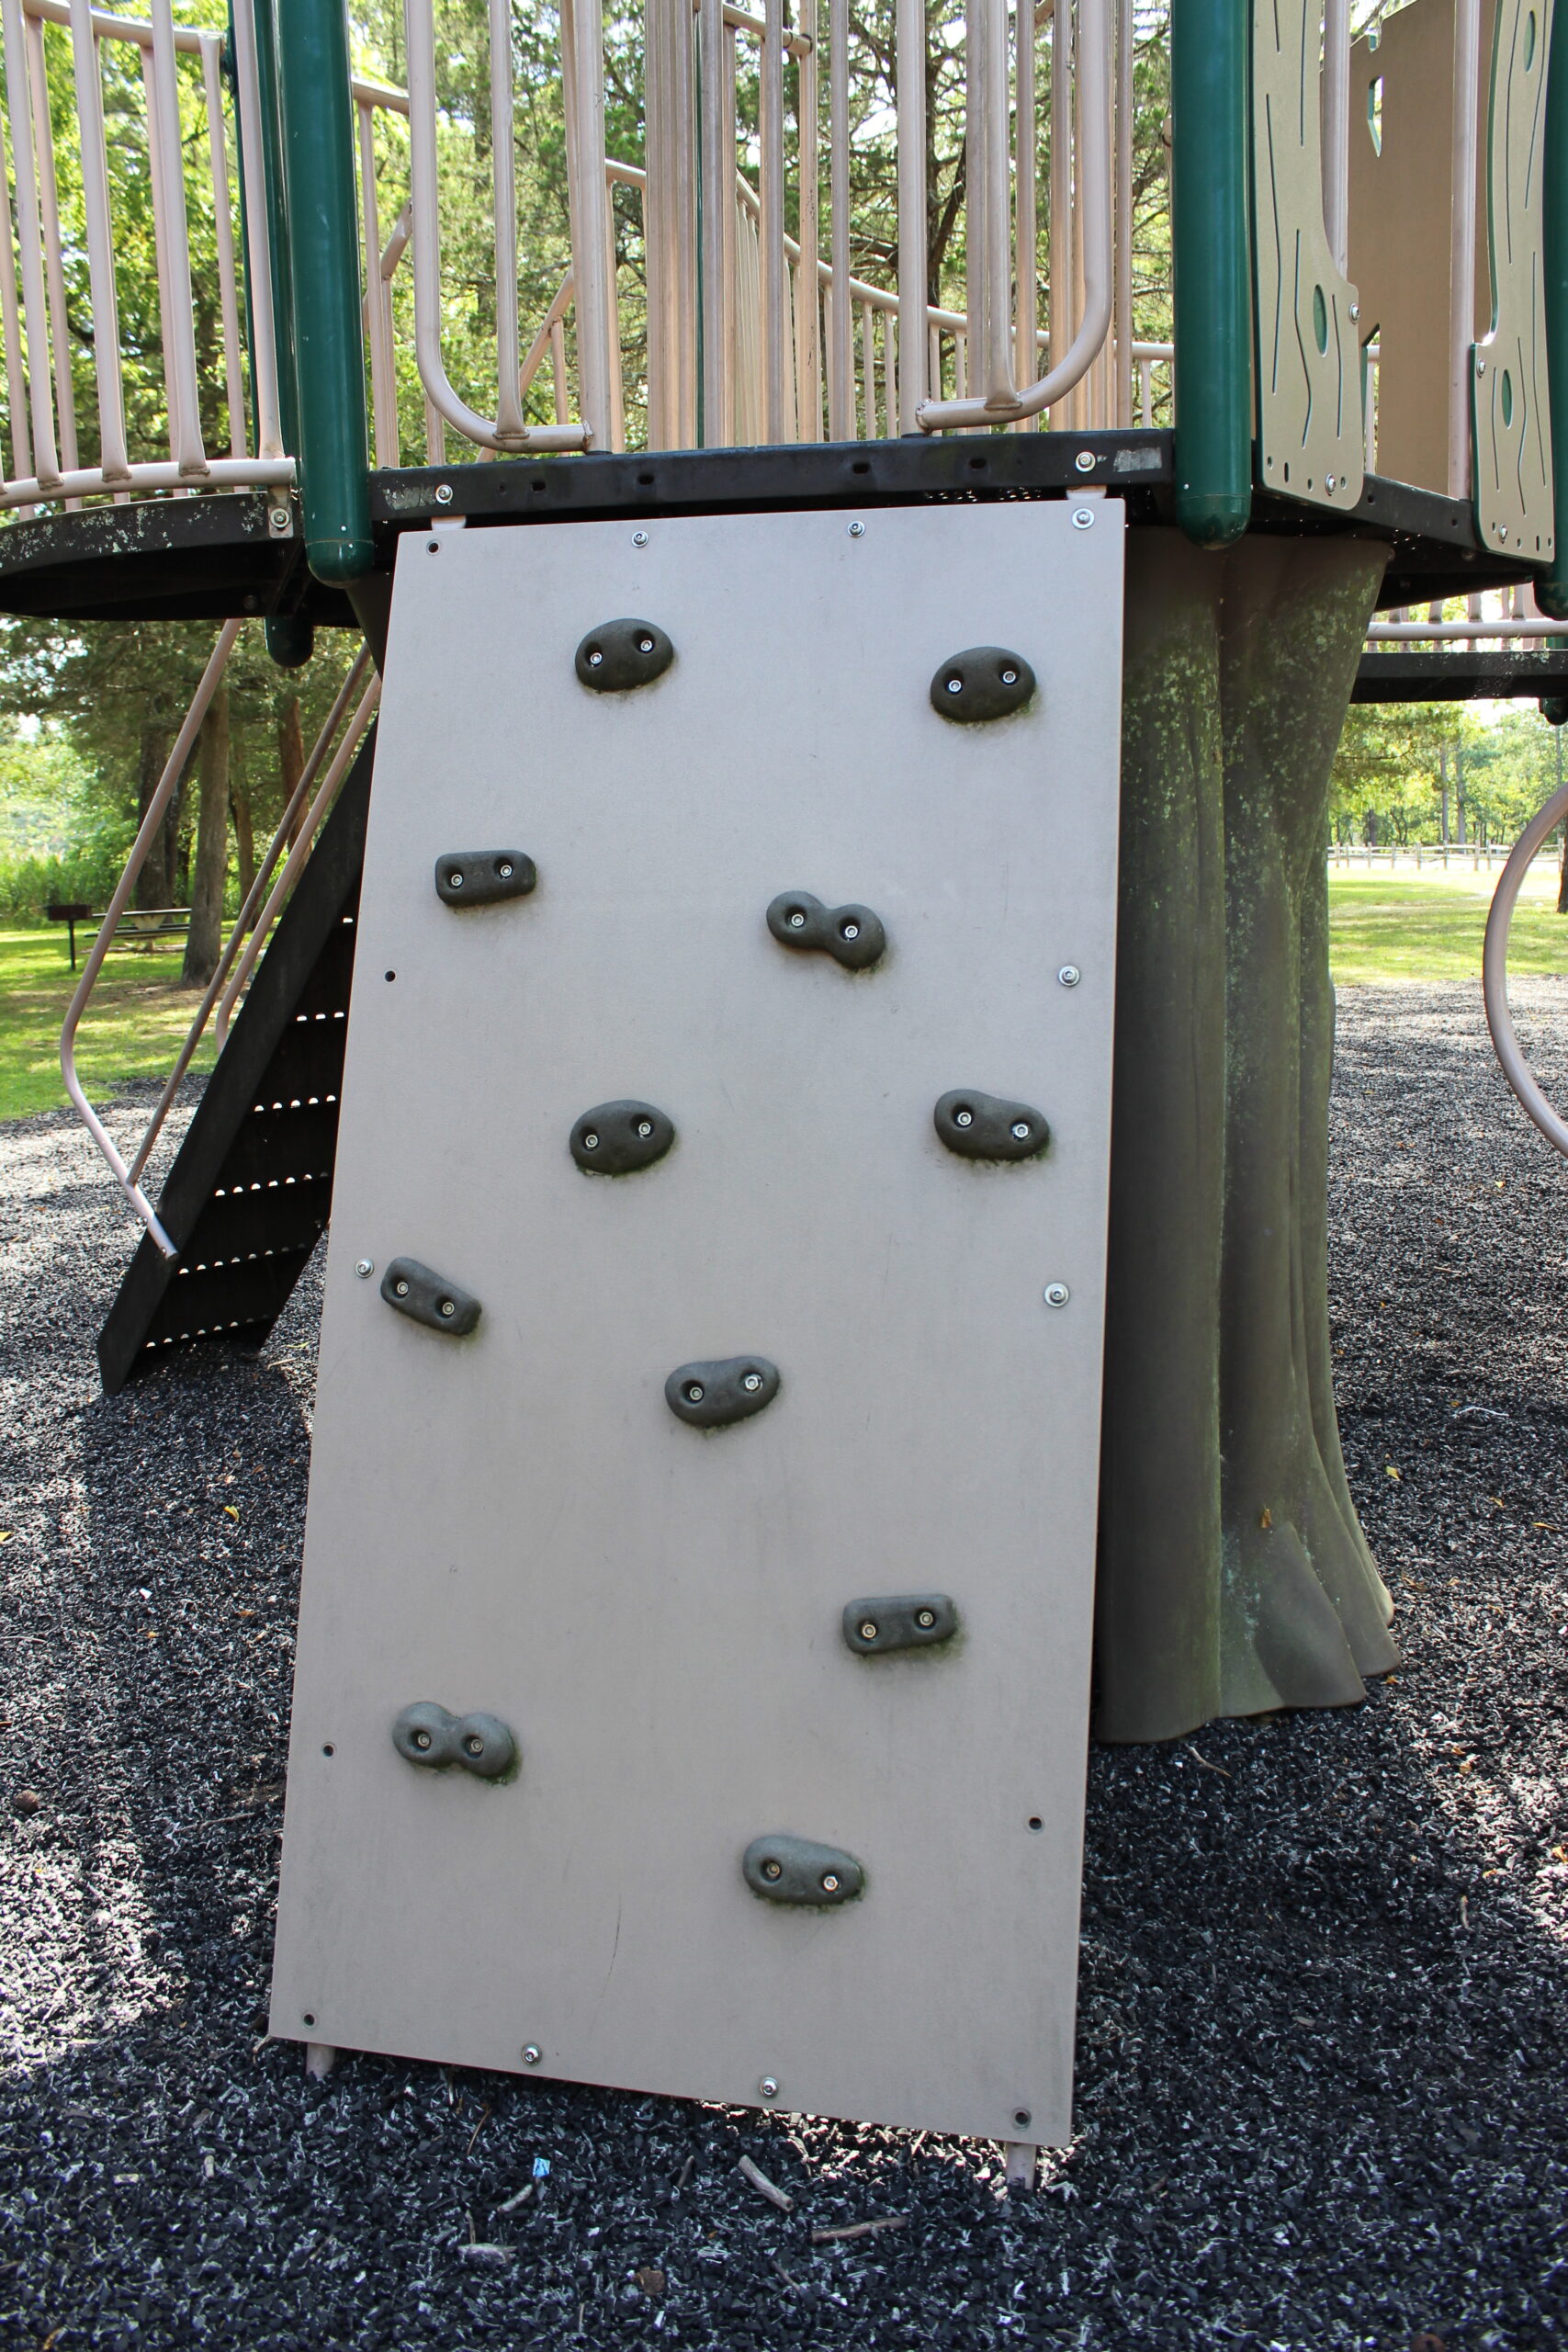 Back Estell Manor Park Playgrounds in Mays Landing NJ - Features - climbing wall